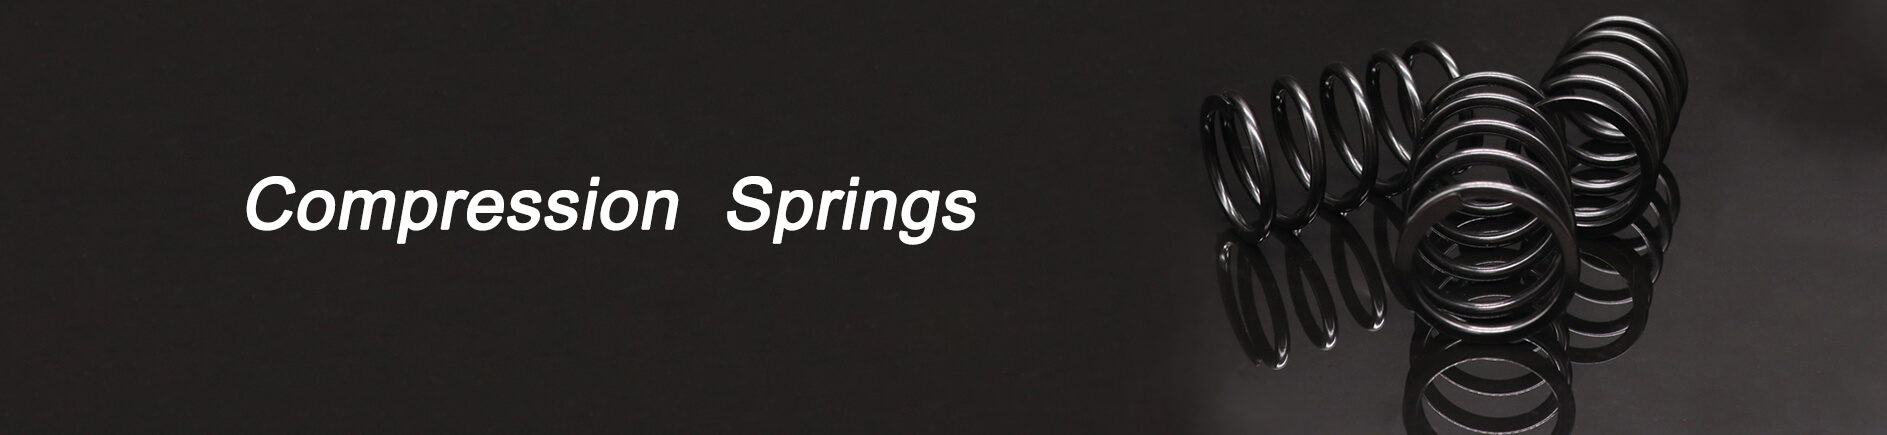 compression-spring-technologies